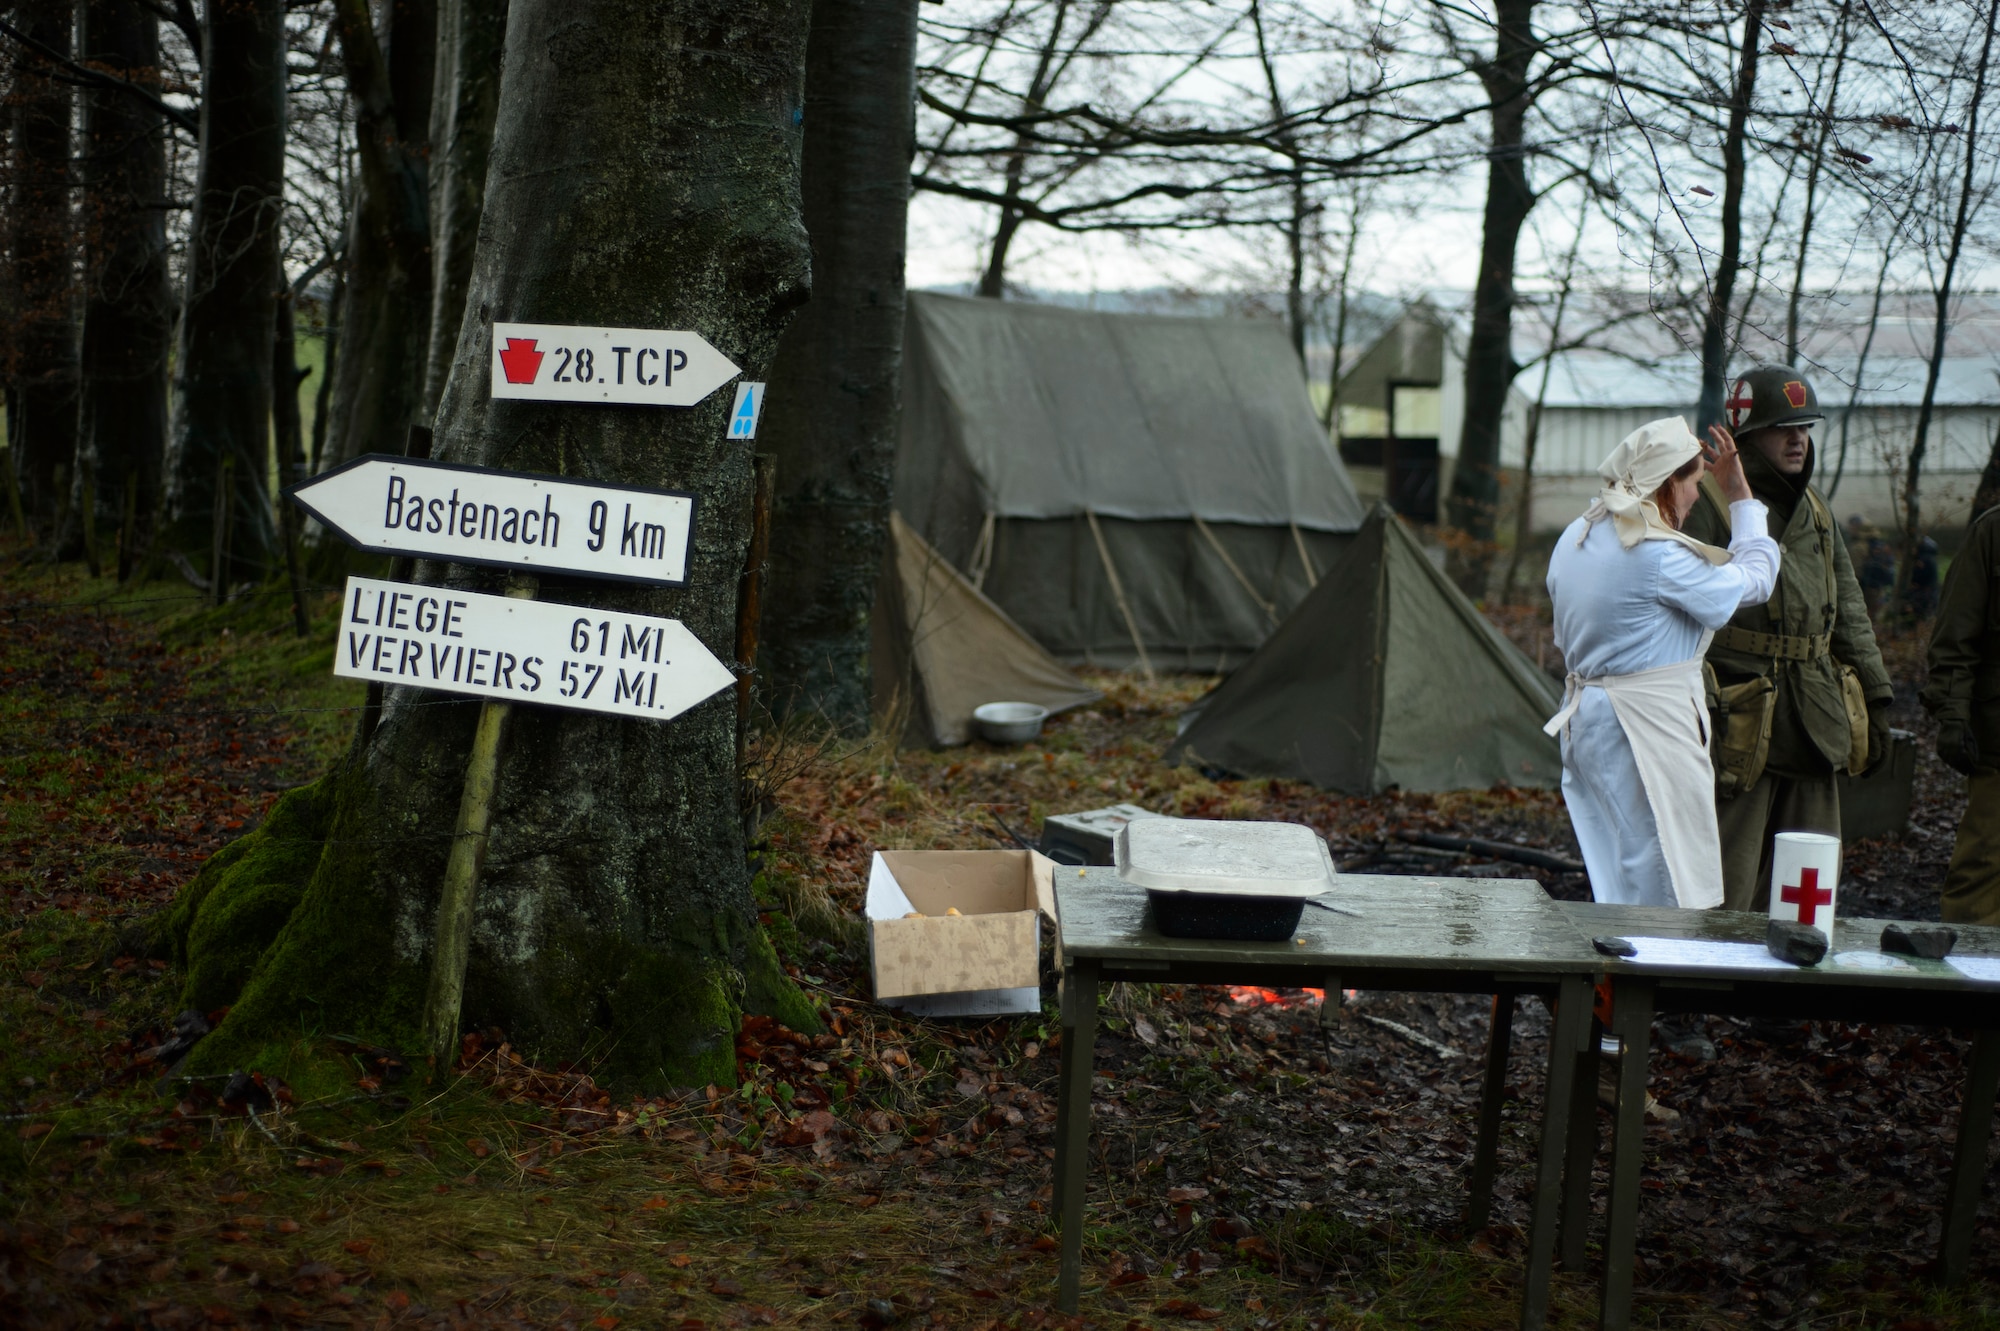 BASTOGNE, Belgium – Reenactors set up camp along the Bastogne Historic Walk route where U.S. forces defended against the German advance in December 1944. While some participants opt to stay in a hotel for the weekend, others decide to brave the frosty winter nights by camping outdoors. (U.S. Air Force photo by Staff Sgt. Nathanael Callon/Released)